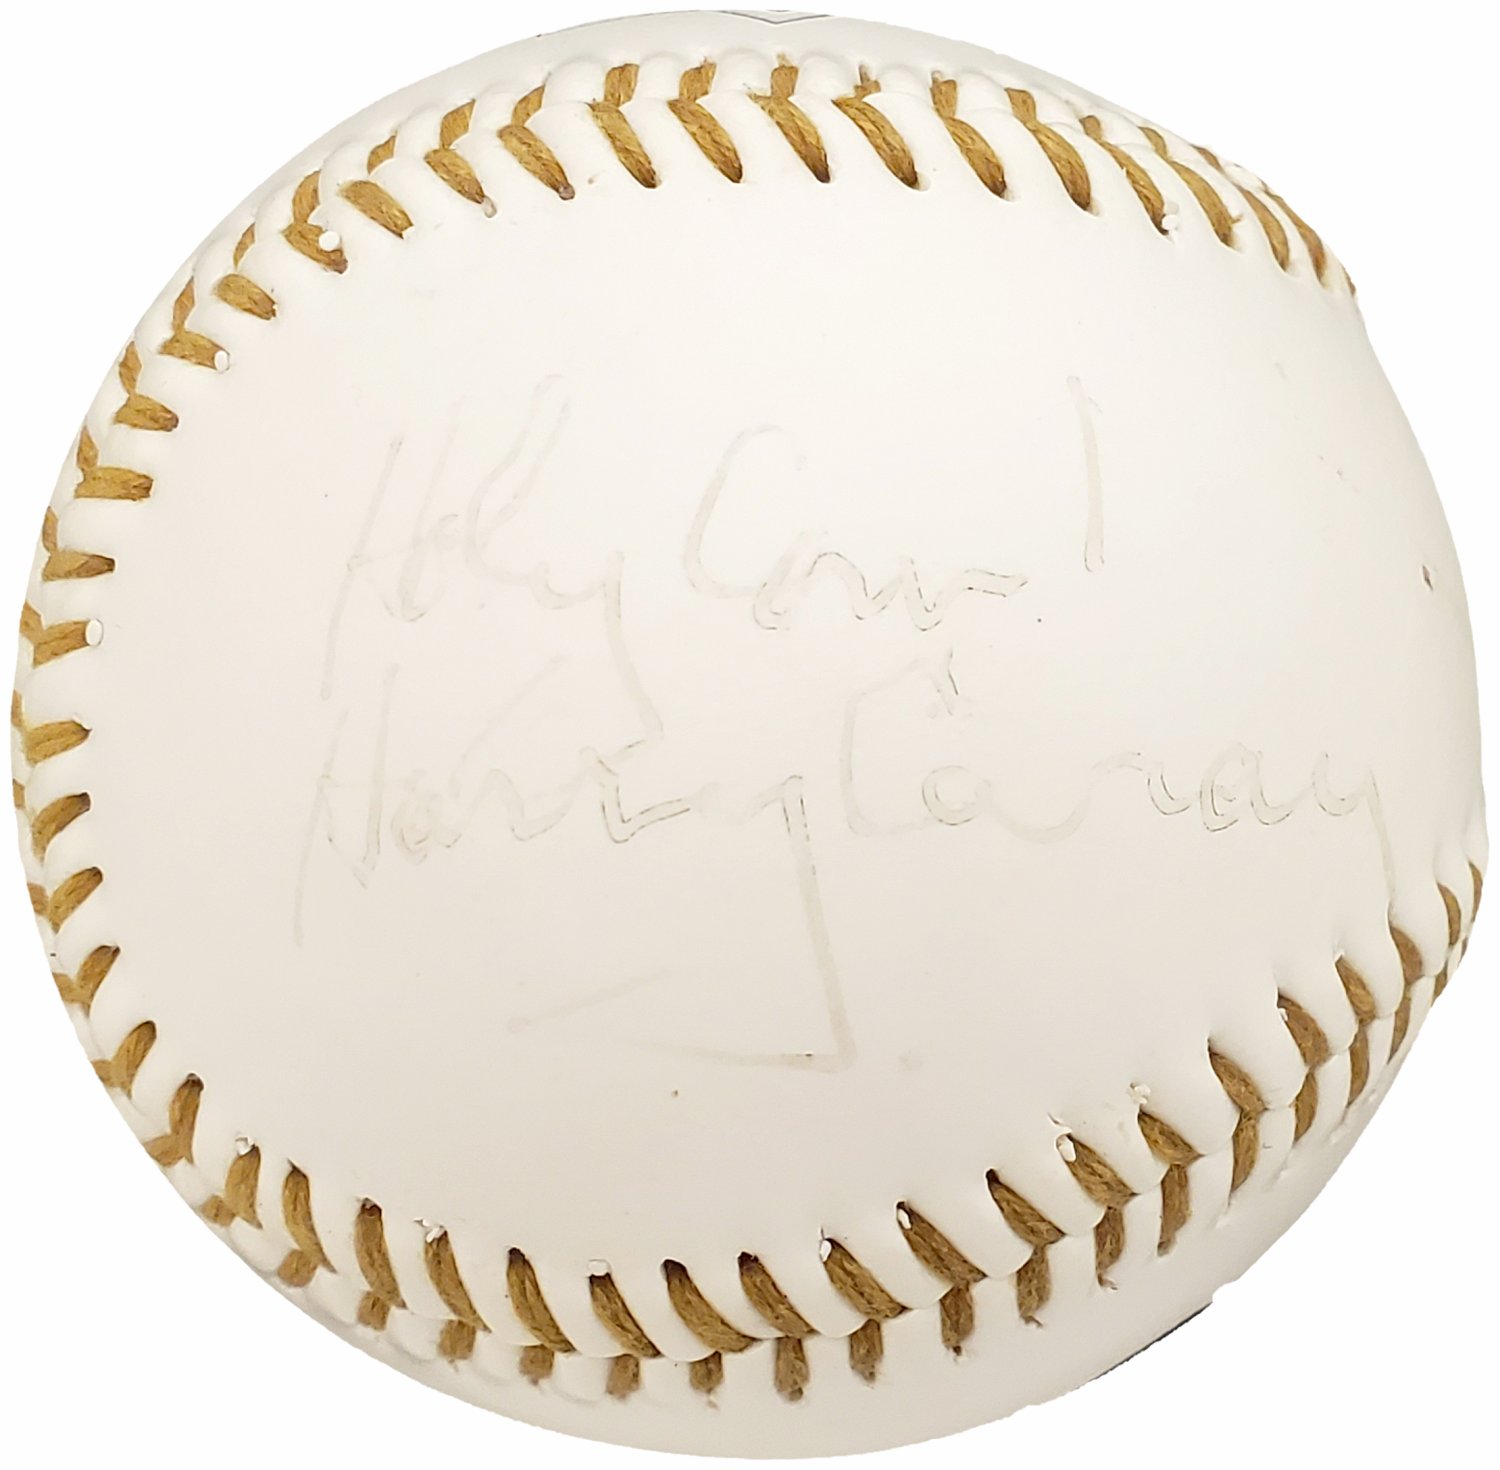 Harry Caray Autographed Signed Official Fotoball Baseball Chicago Cubs  Announcer Holy Cow PSA/DNA